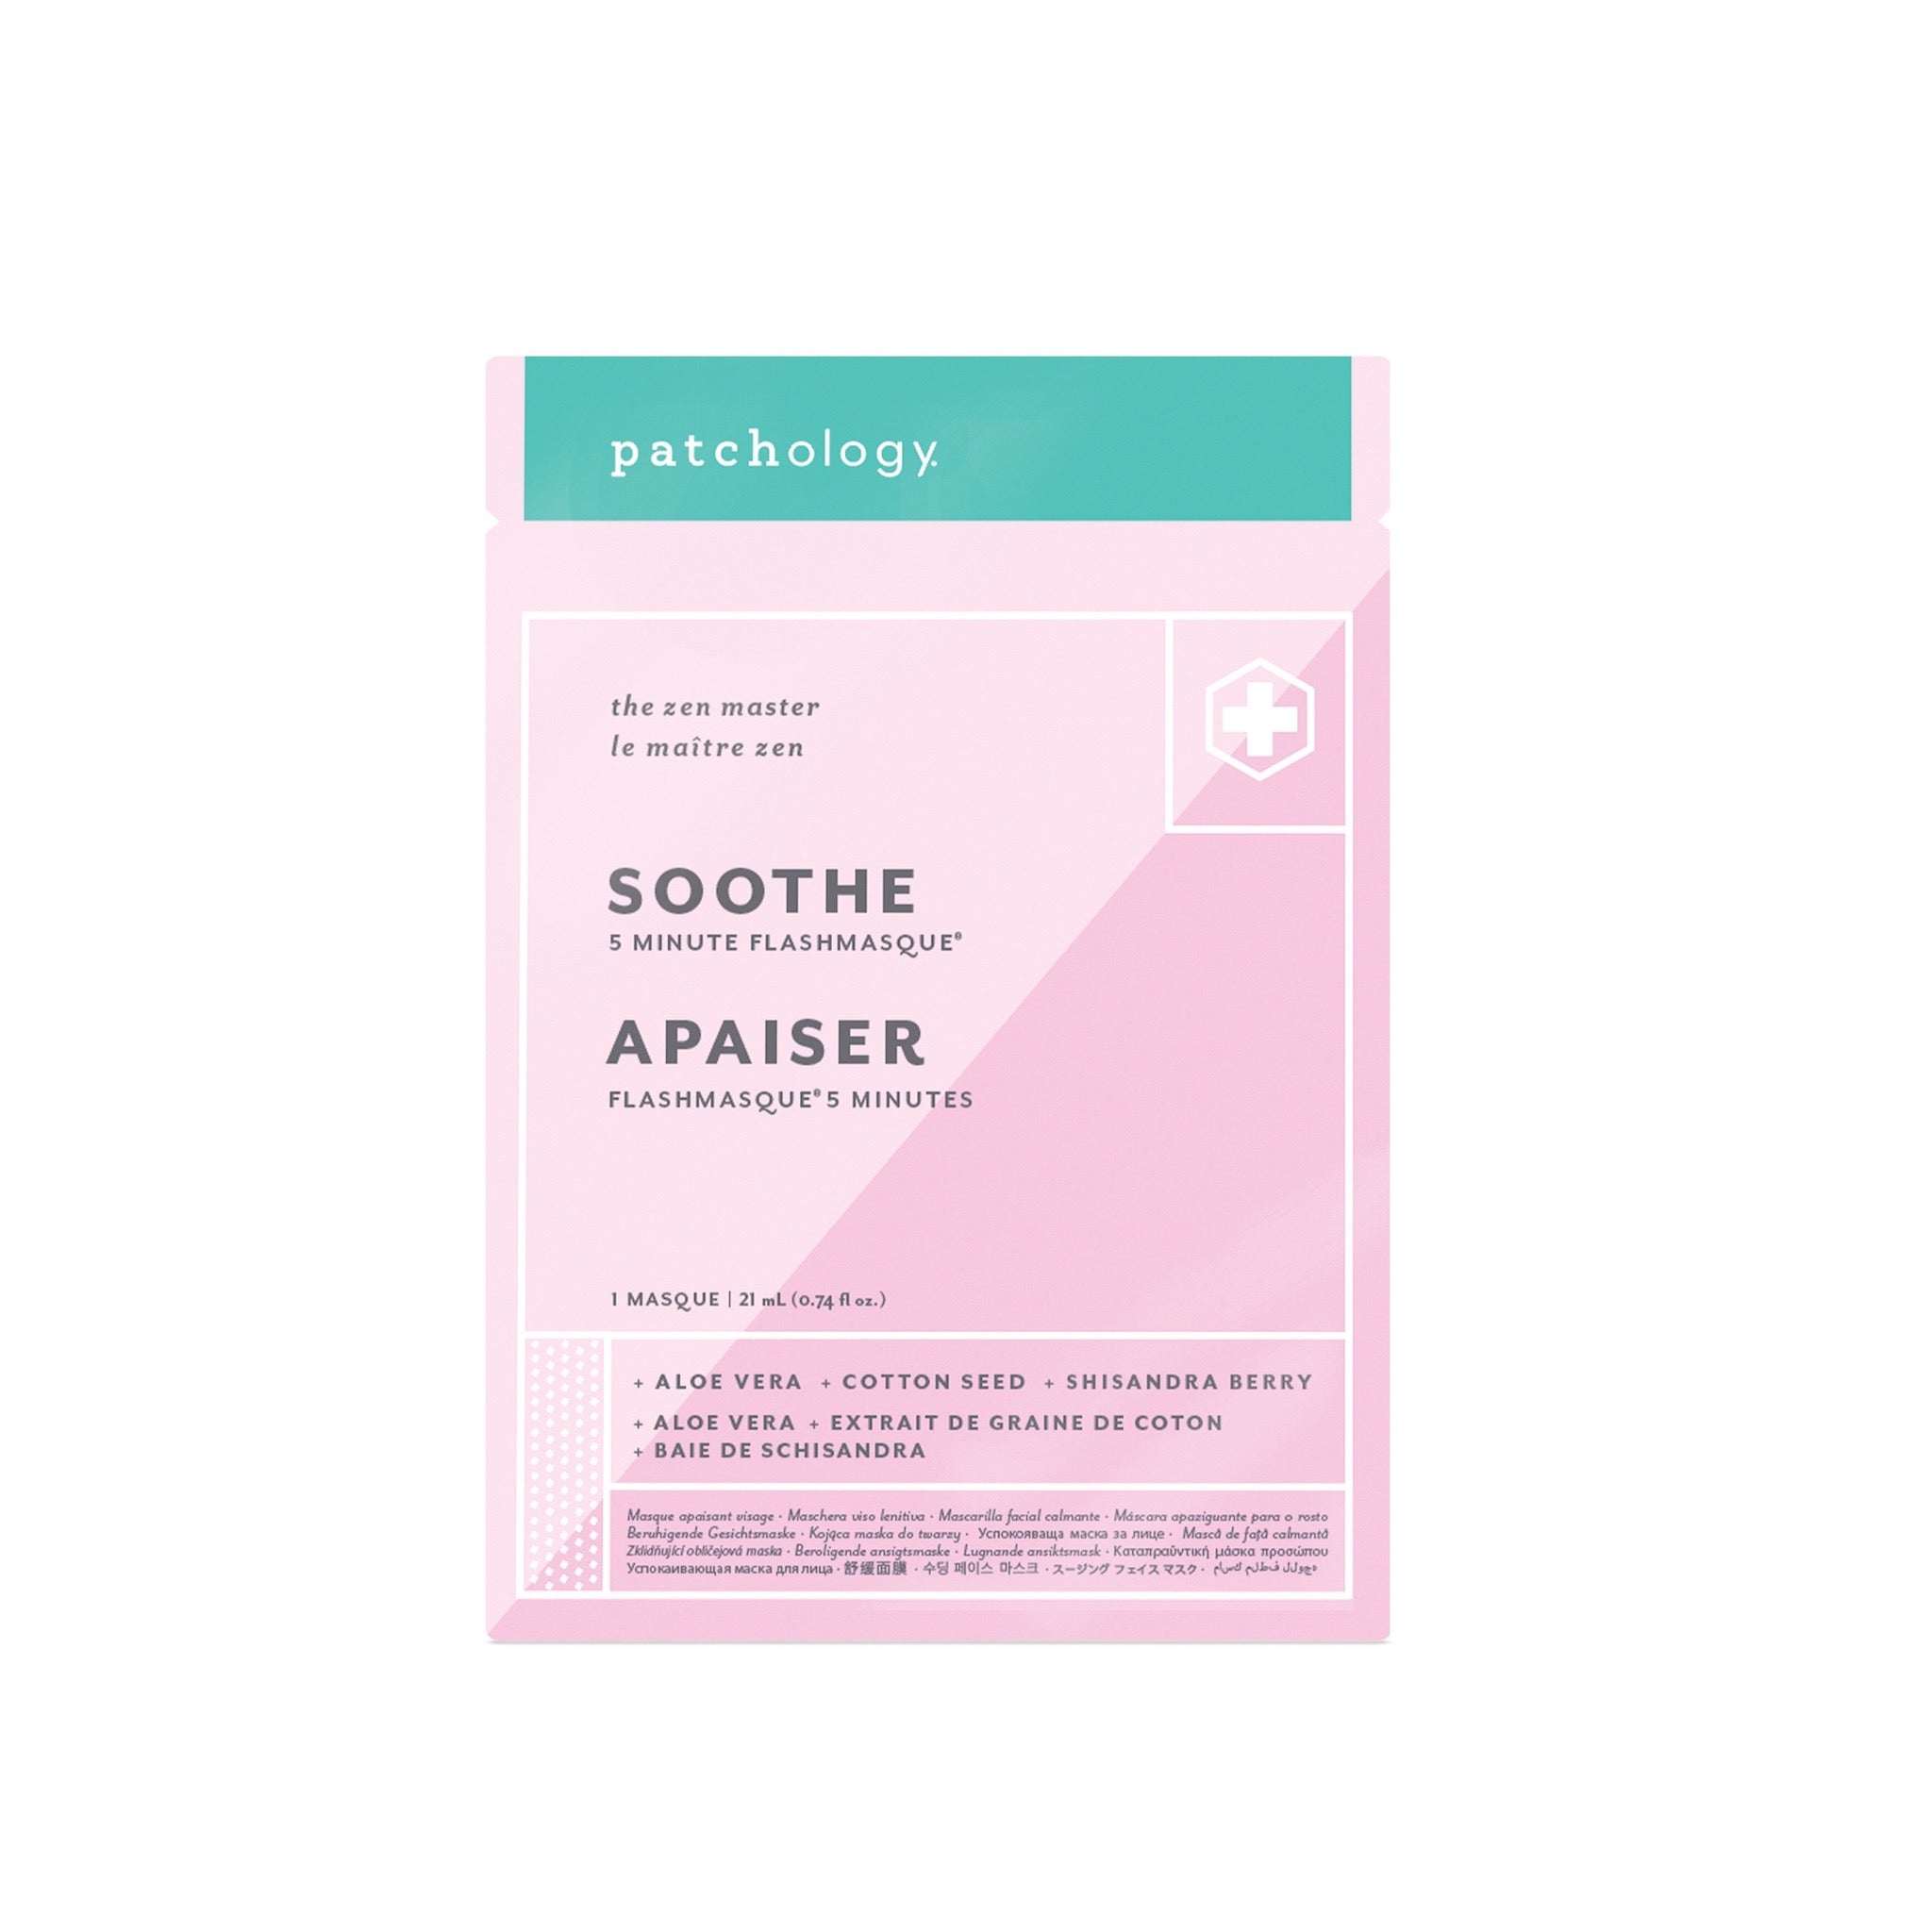 Patchology FlashMasque Soothe Sheet Mask online at Hermosa, Ireland's Premium Beauty Store. (6620767551657)